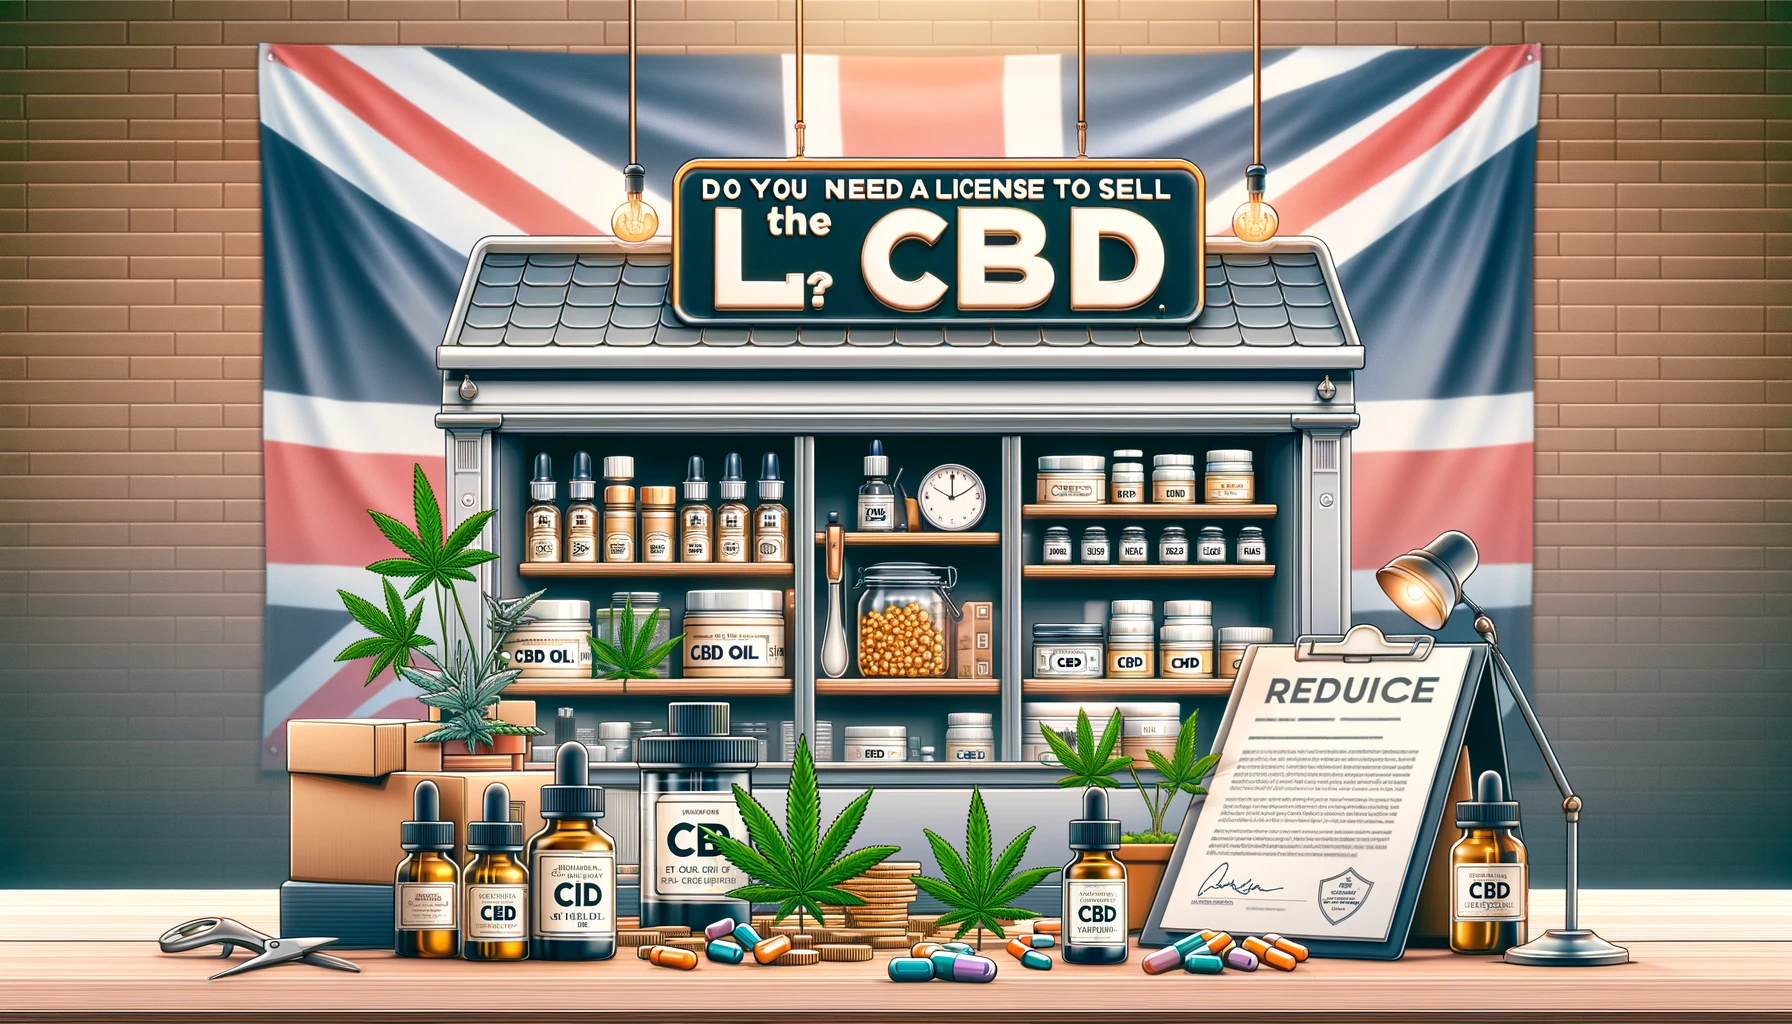 Do You Need a License to Sell CBD in the UK?